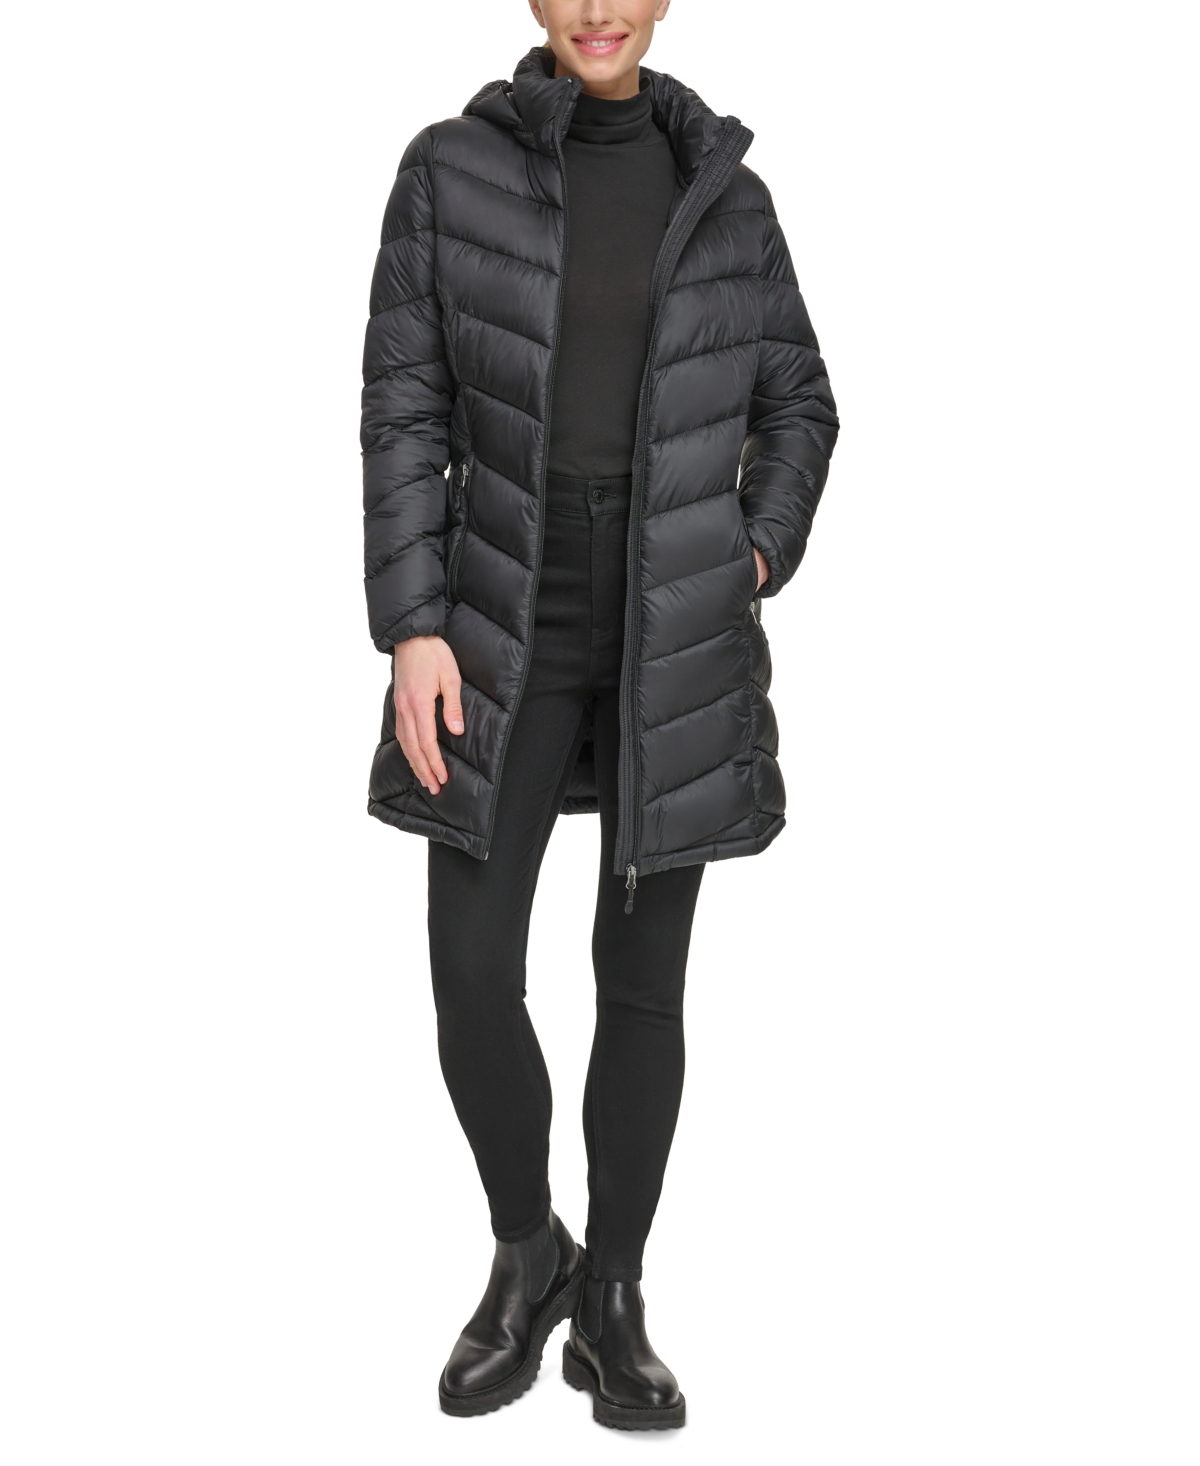 Women's Packable Hooded Puffer Coat, Created for Macy's - Black